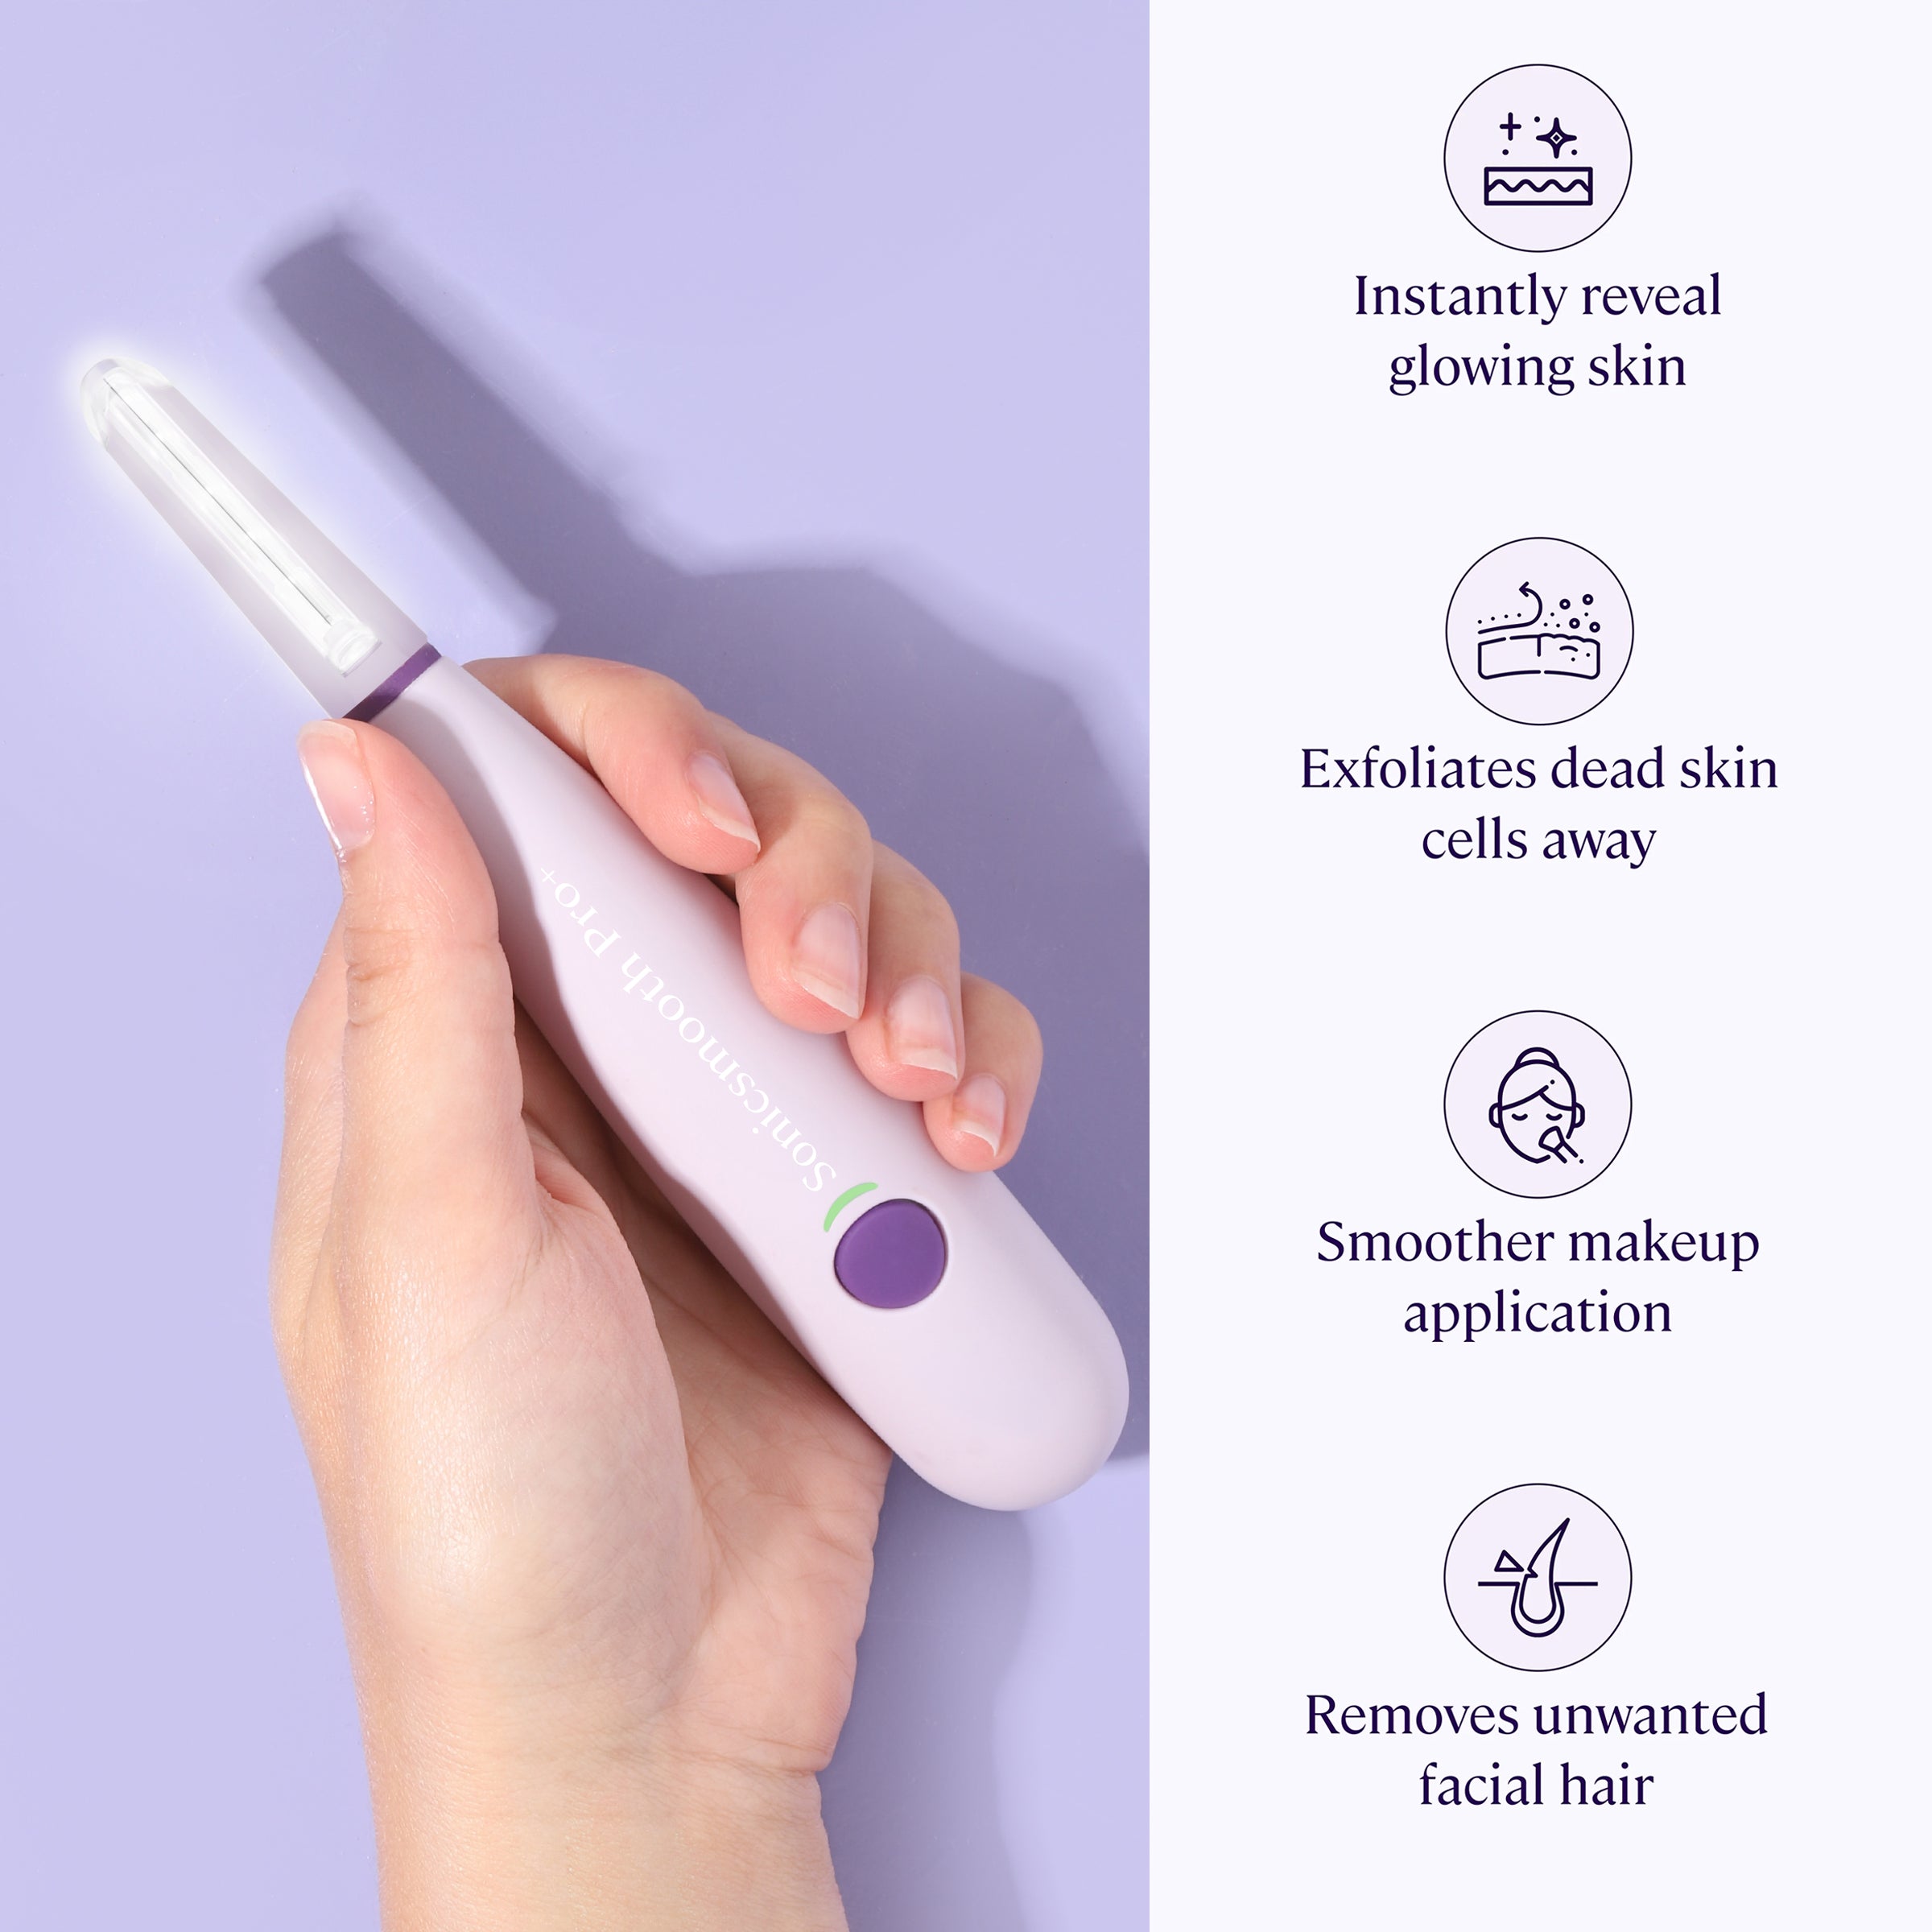 A hand holding a Sonicsmooth Pro+ by Michael Todd Beauty against a purple background with icons and text detailing its benefits for skin.